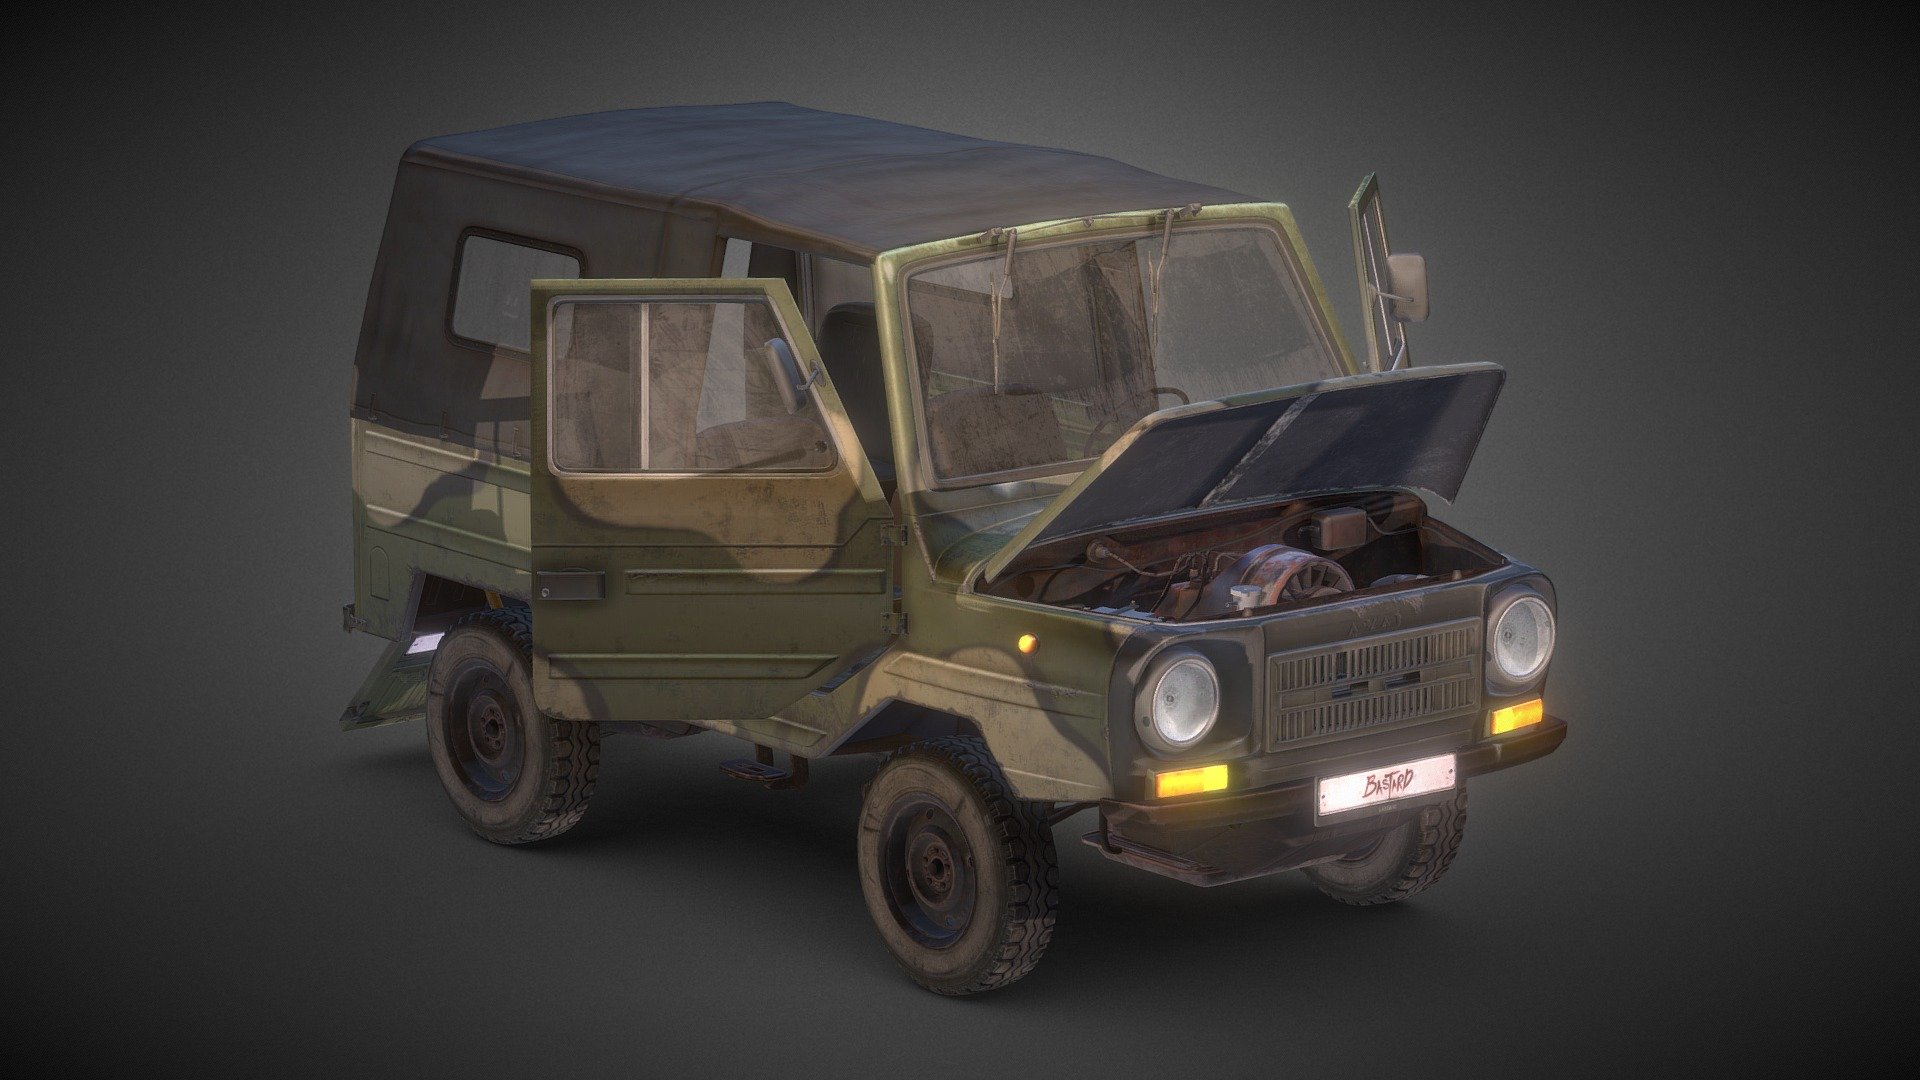 This model was created for modification in the game Dayz Standalone for Bastard Mods.

Discord - https://discord.com/invite/tBqFQQh85s

Reference - Valentin Shafransky - Dayz Bastard - Luaz 969 - 3D model by LuckyBastard (@luckybas) 3d model